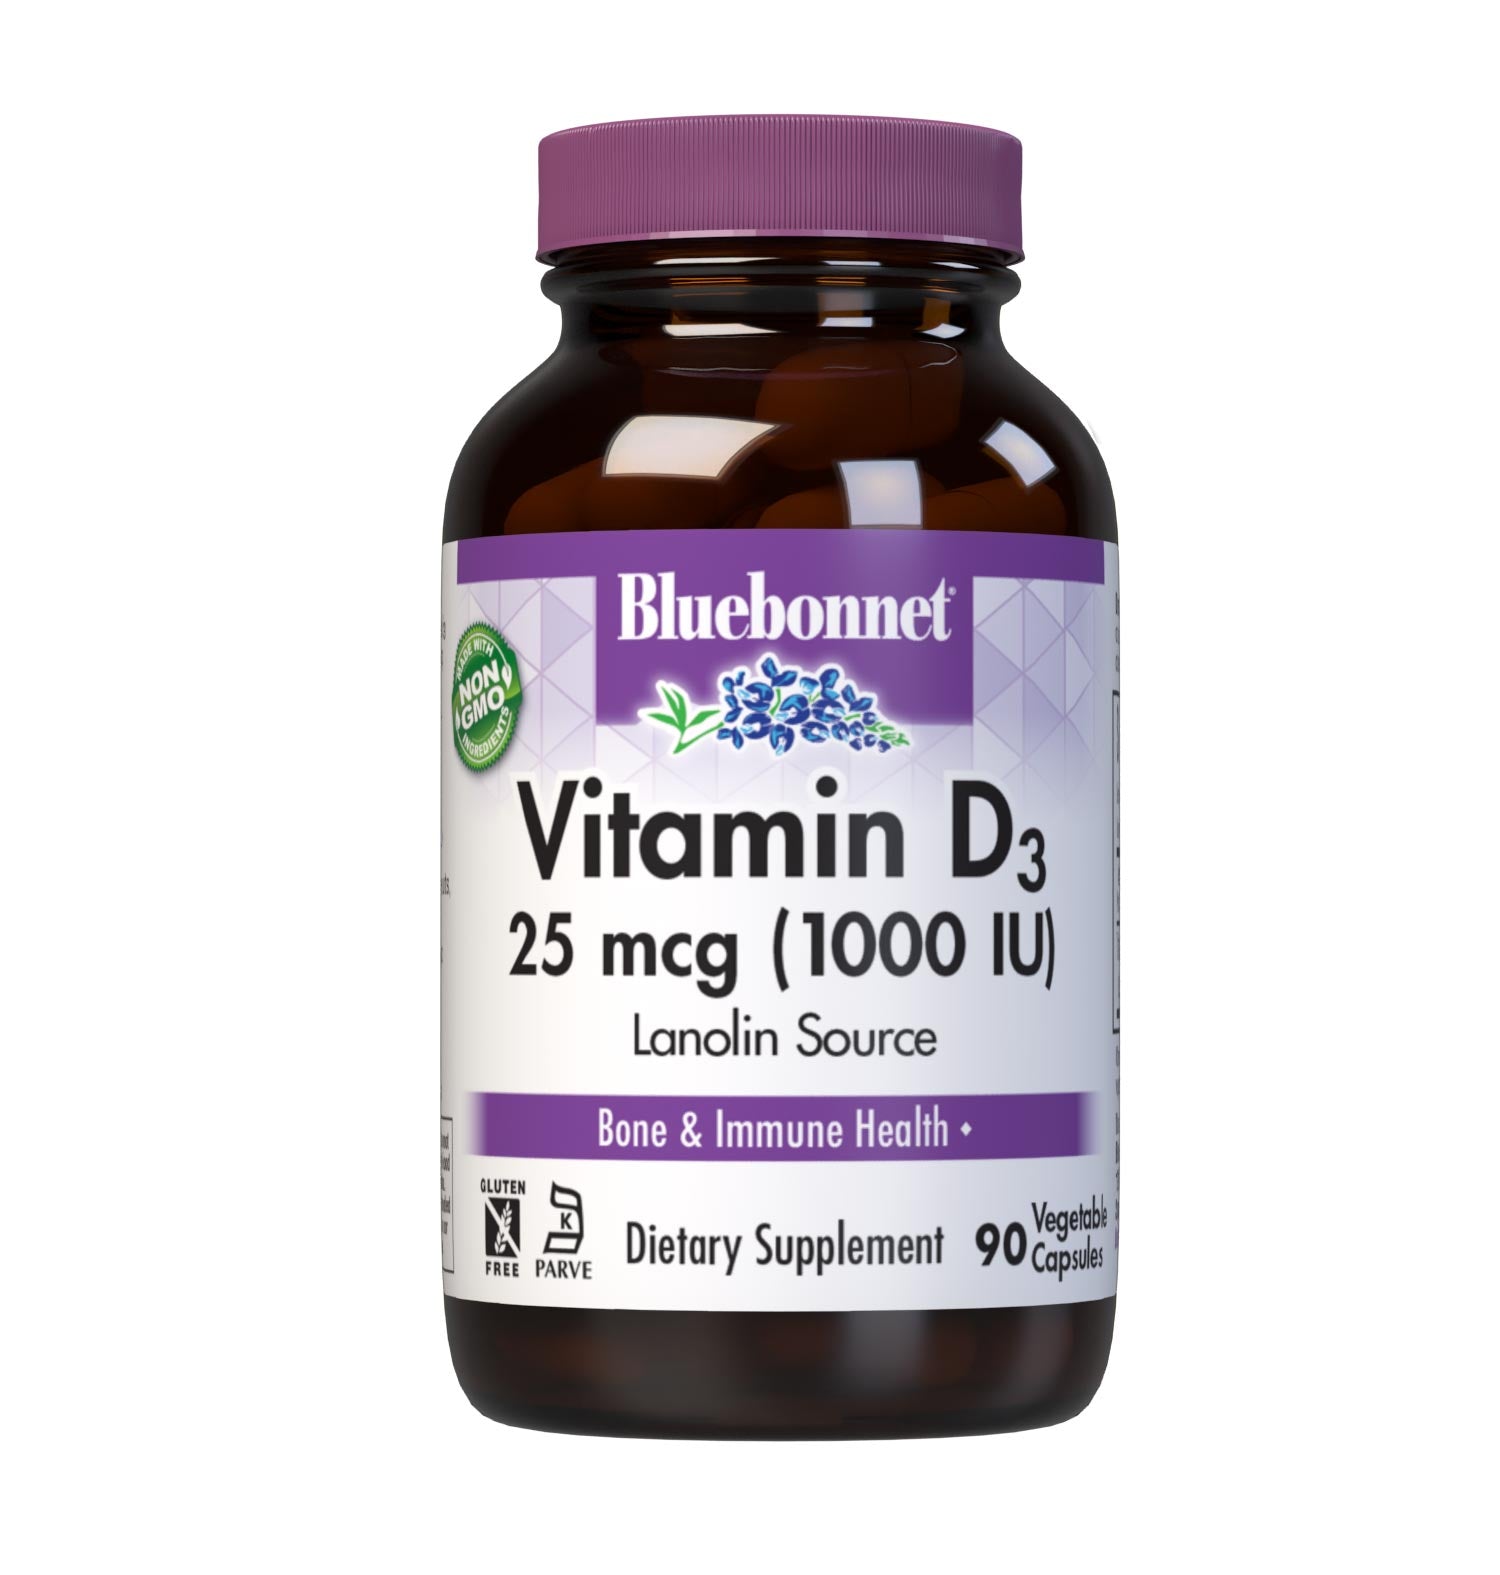 Bluebonnet’s Vitamin D3 1000 IU (25 mcg) Vegetable Capsules are formulated with vitamin D3 (cholecalciferol) from lanolin that supports strong healthy bones and immune function. #size_90 count